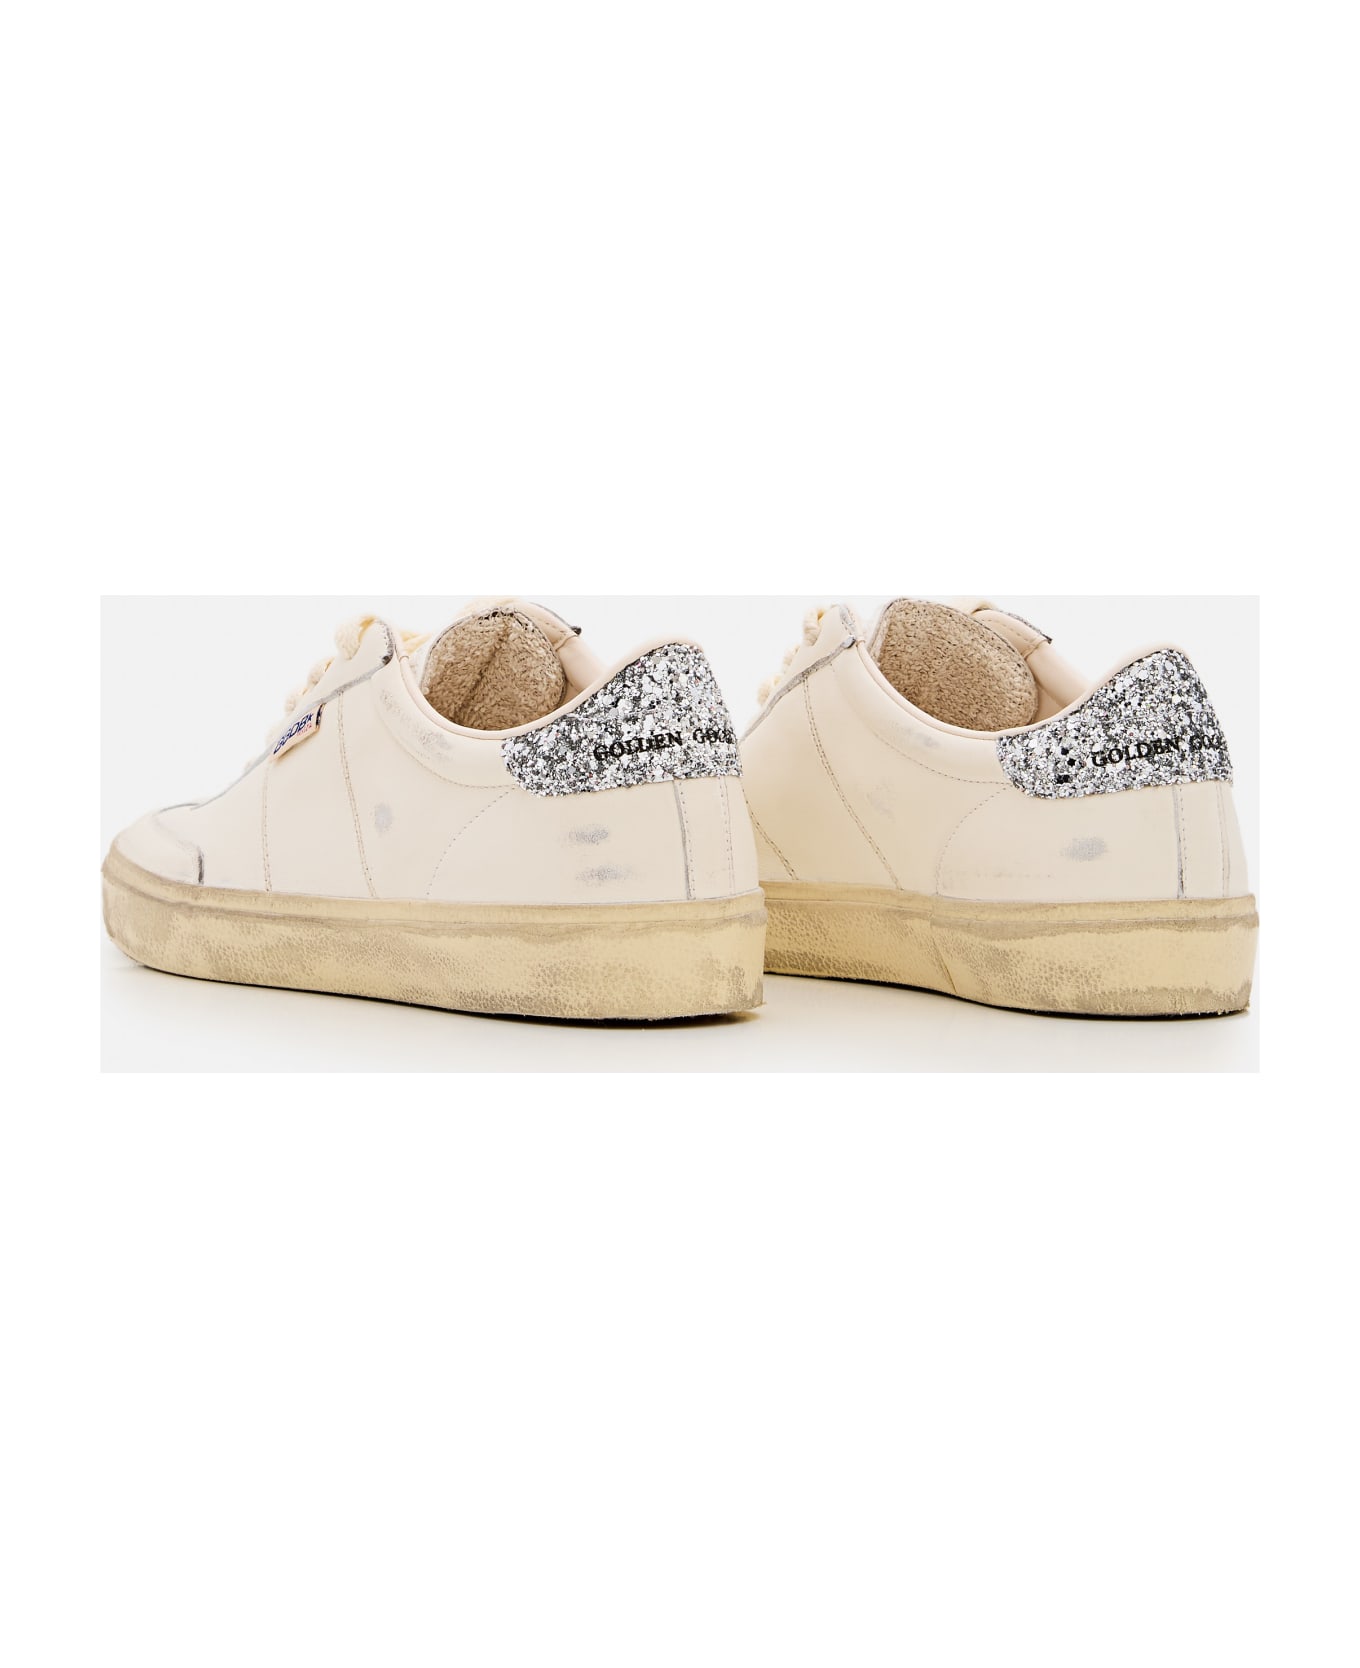 Golden Goose Soul Star Distressed Glittered Lace-up Sneakers - White/Silver スニーカー